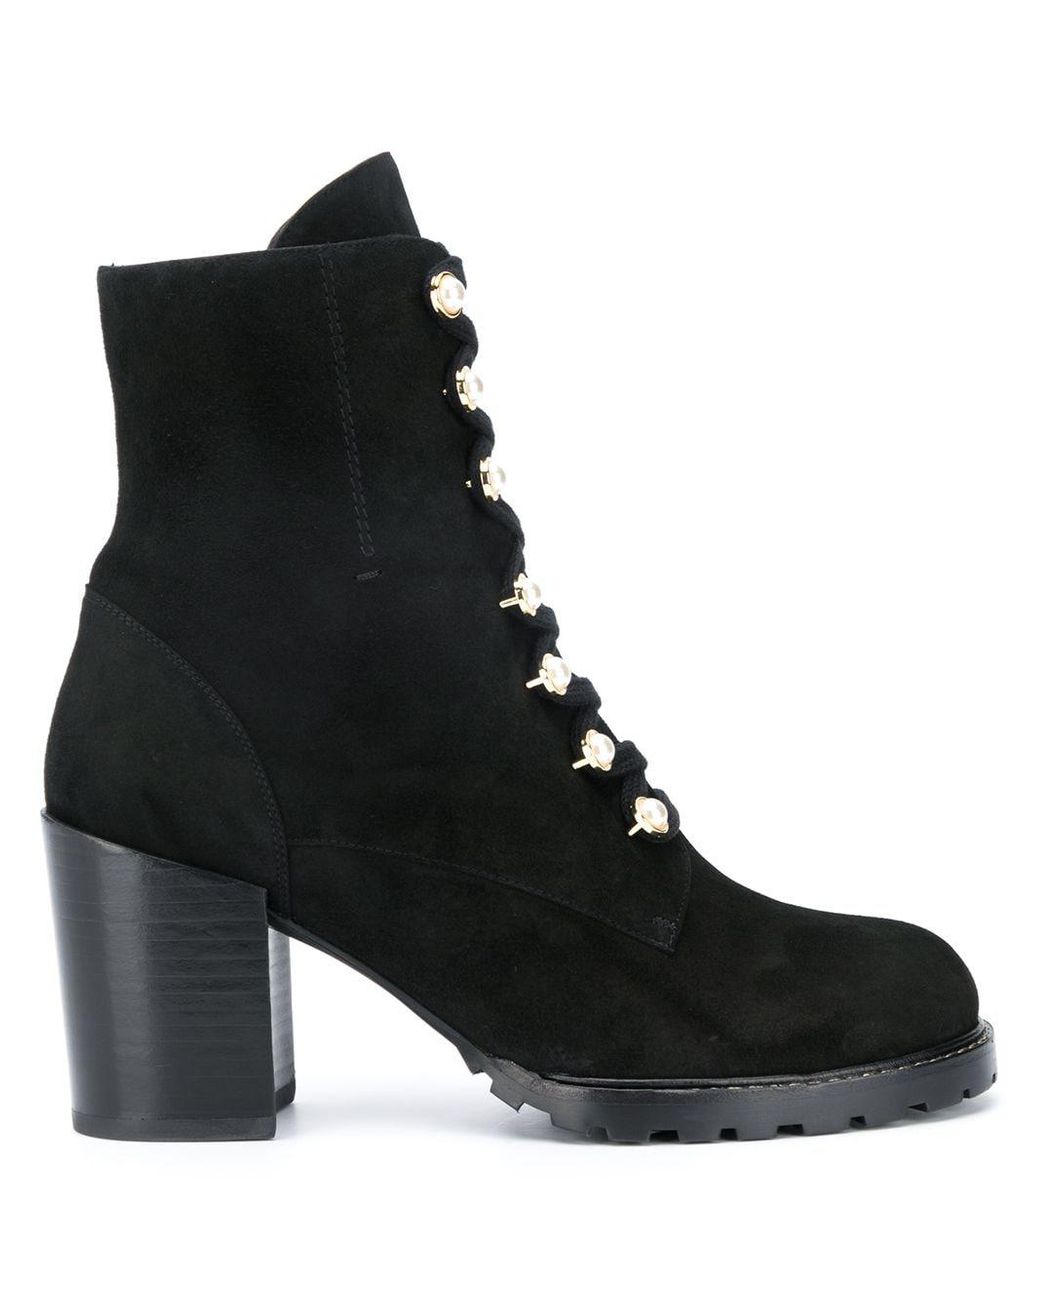 Stuart Weitzman Leather Ivey Lace-up Boots in Black - Lyst